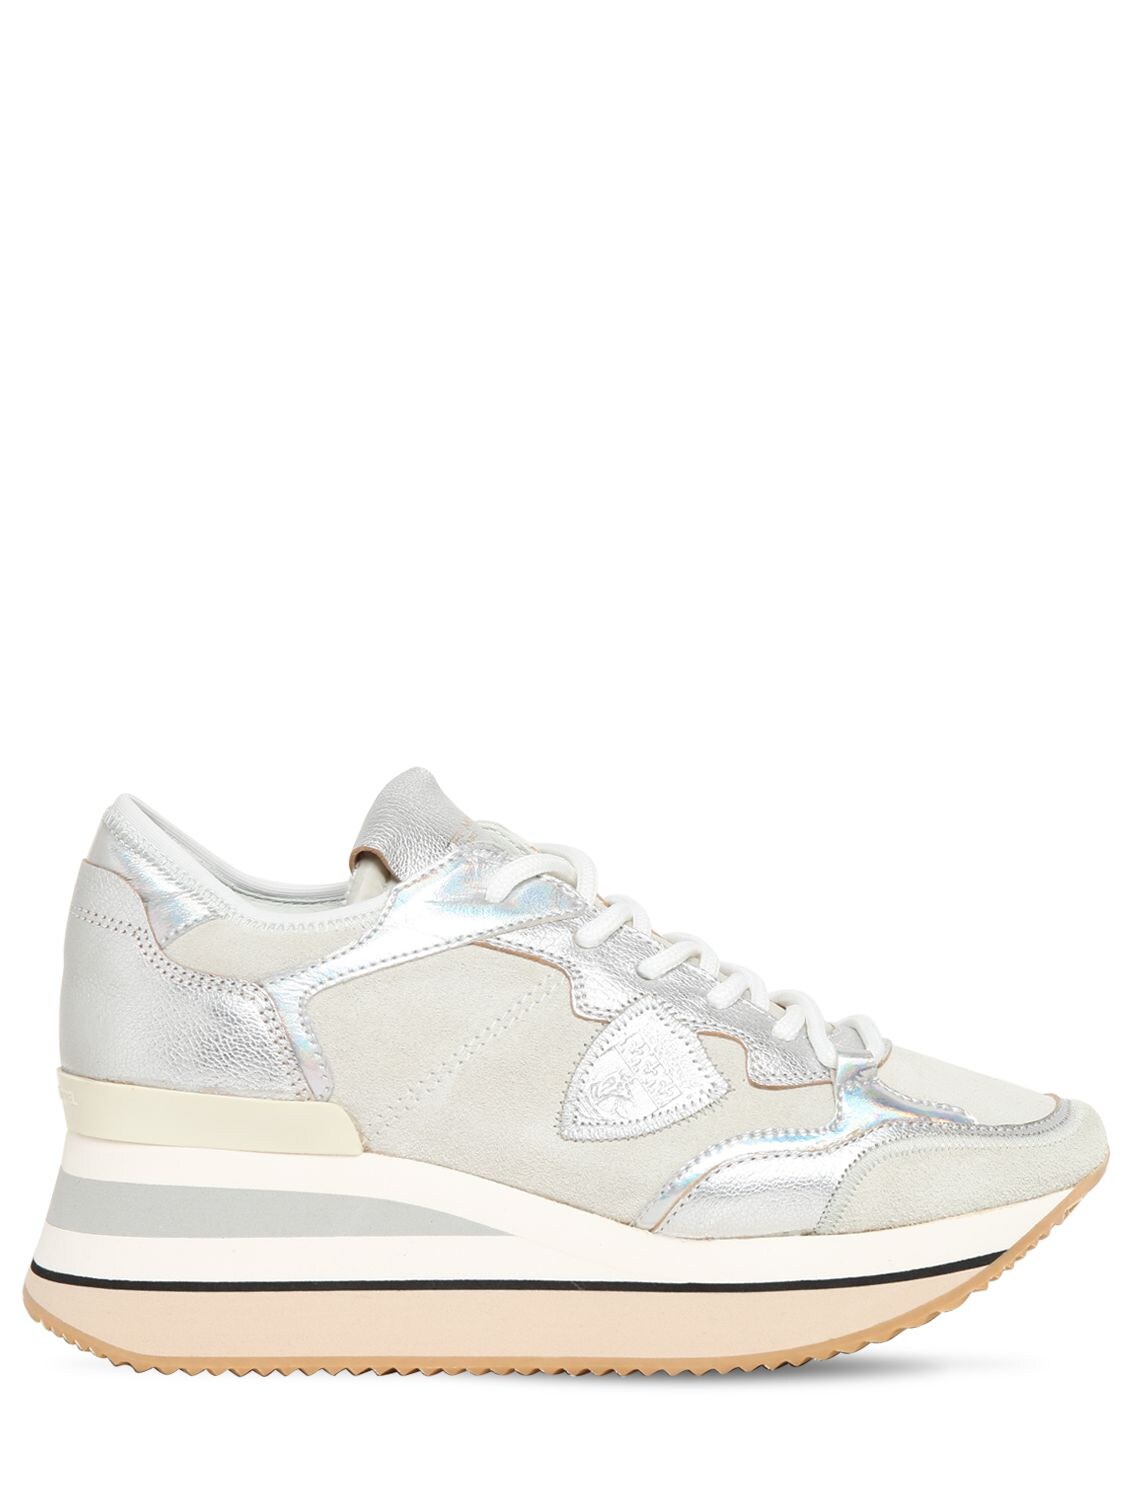 Philippe Model Triomphe Daim Sneakers In Silver